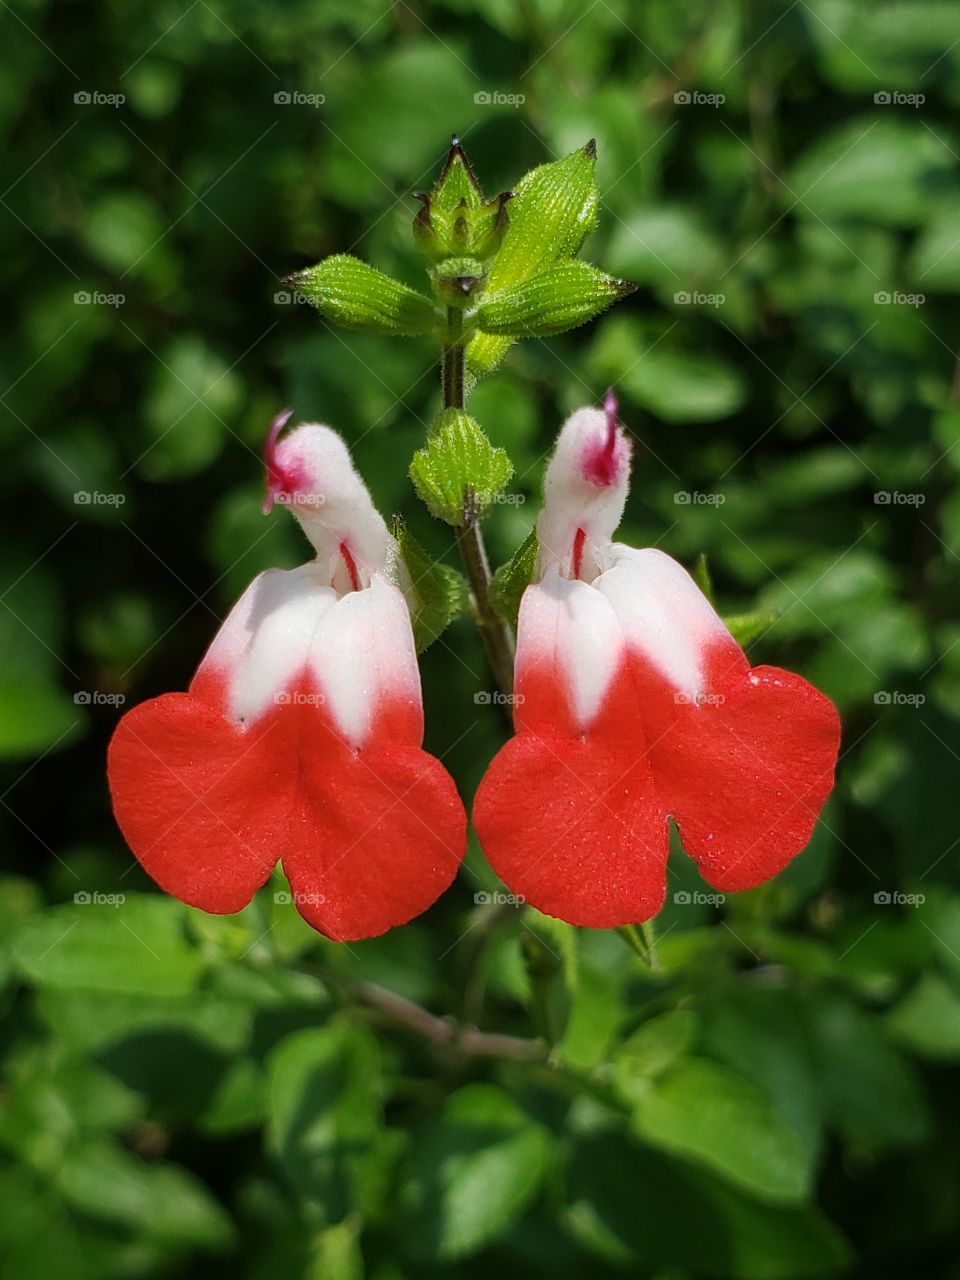 red and white flowers